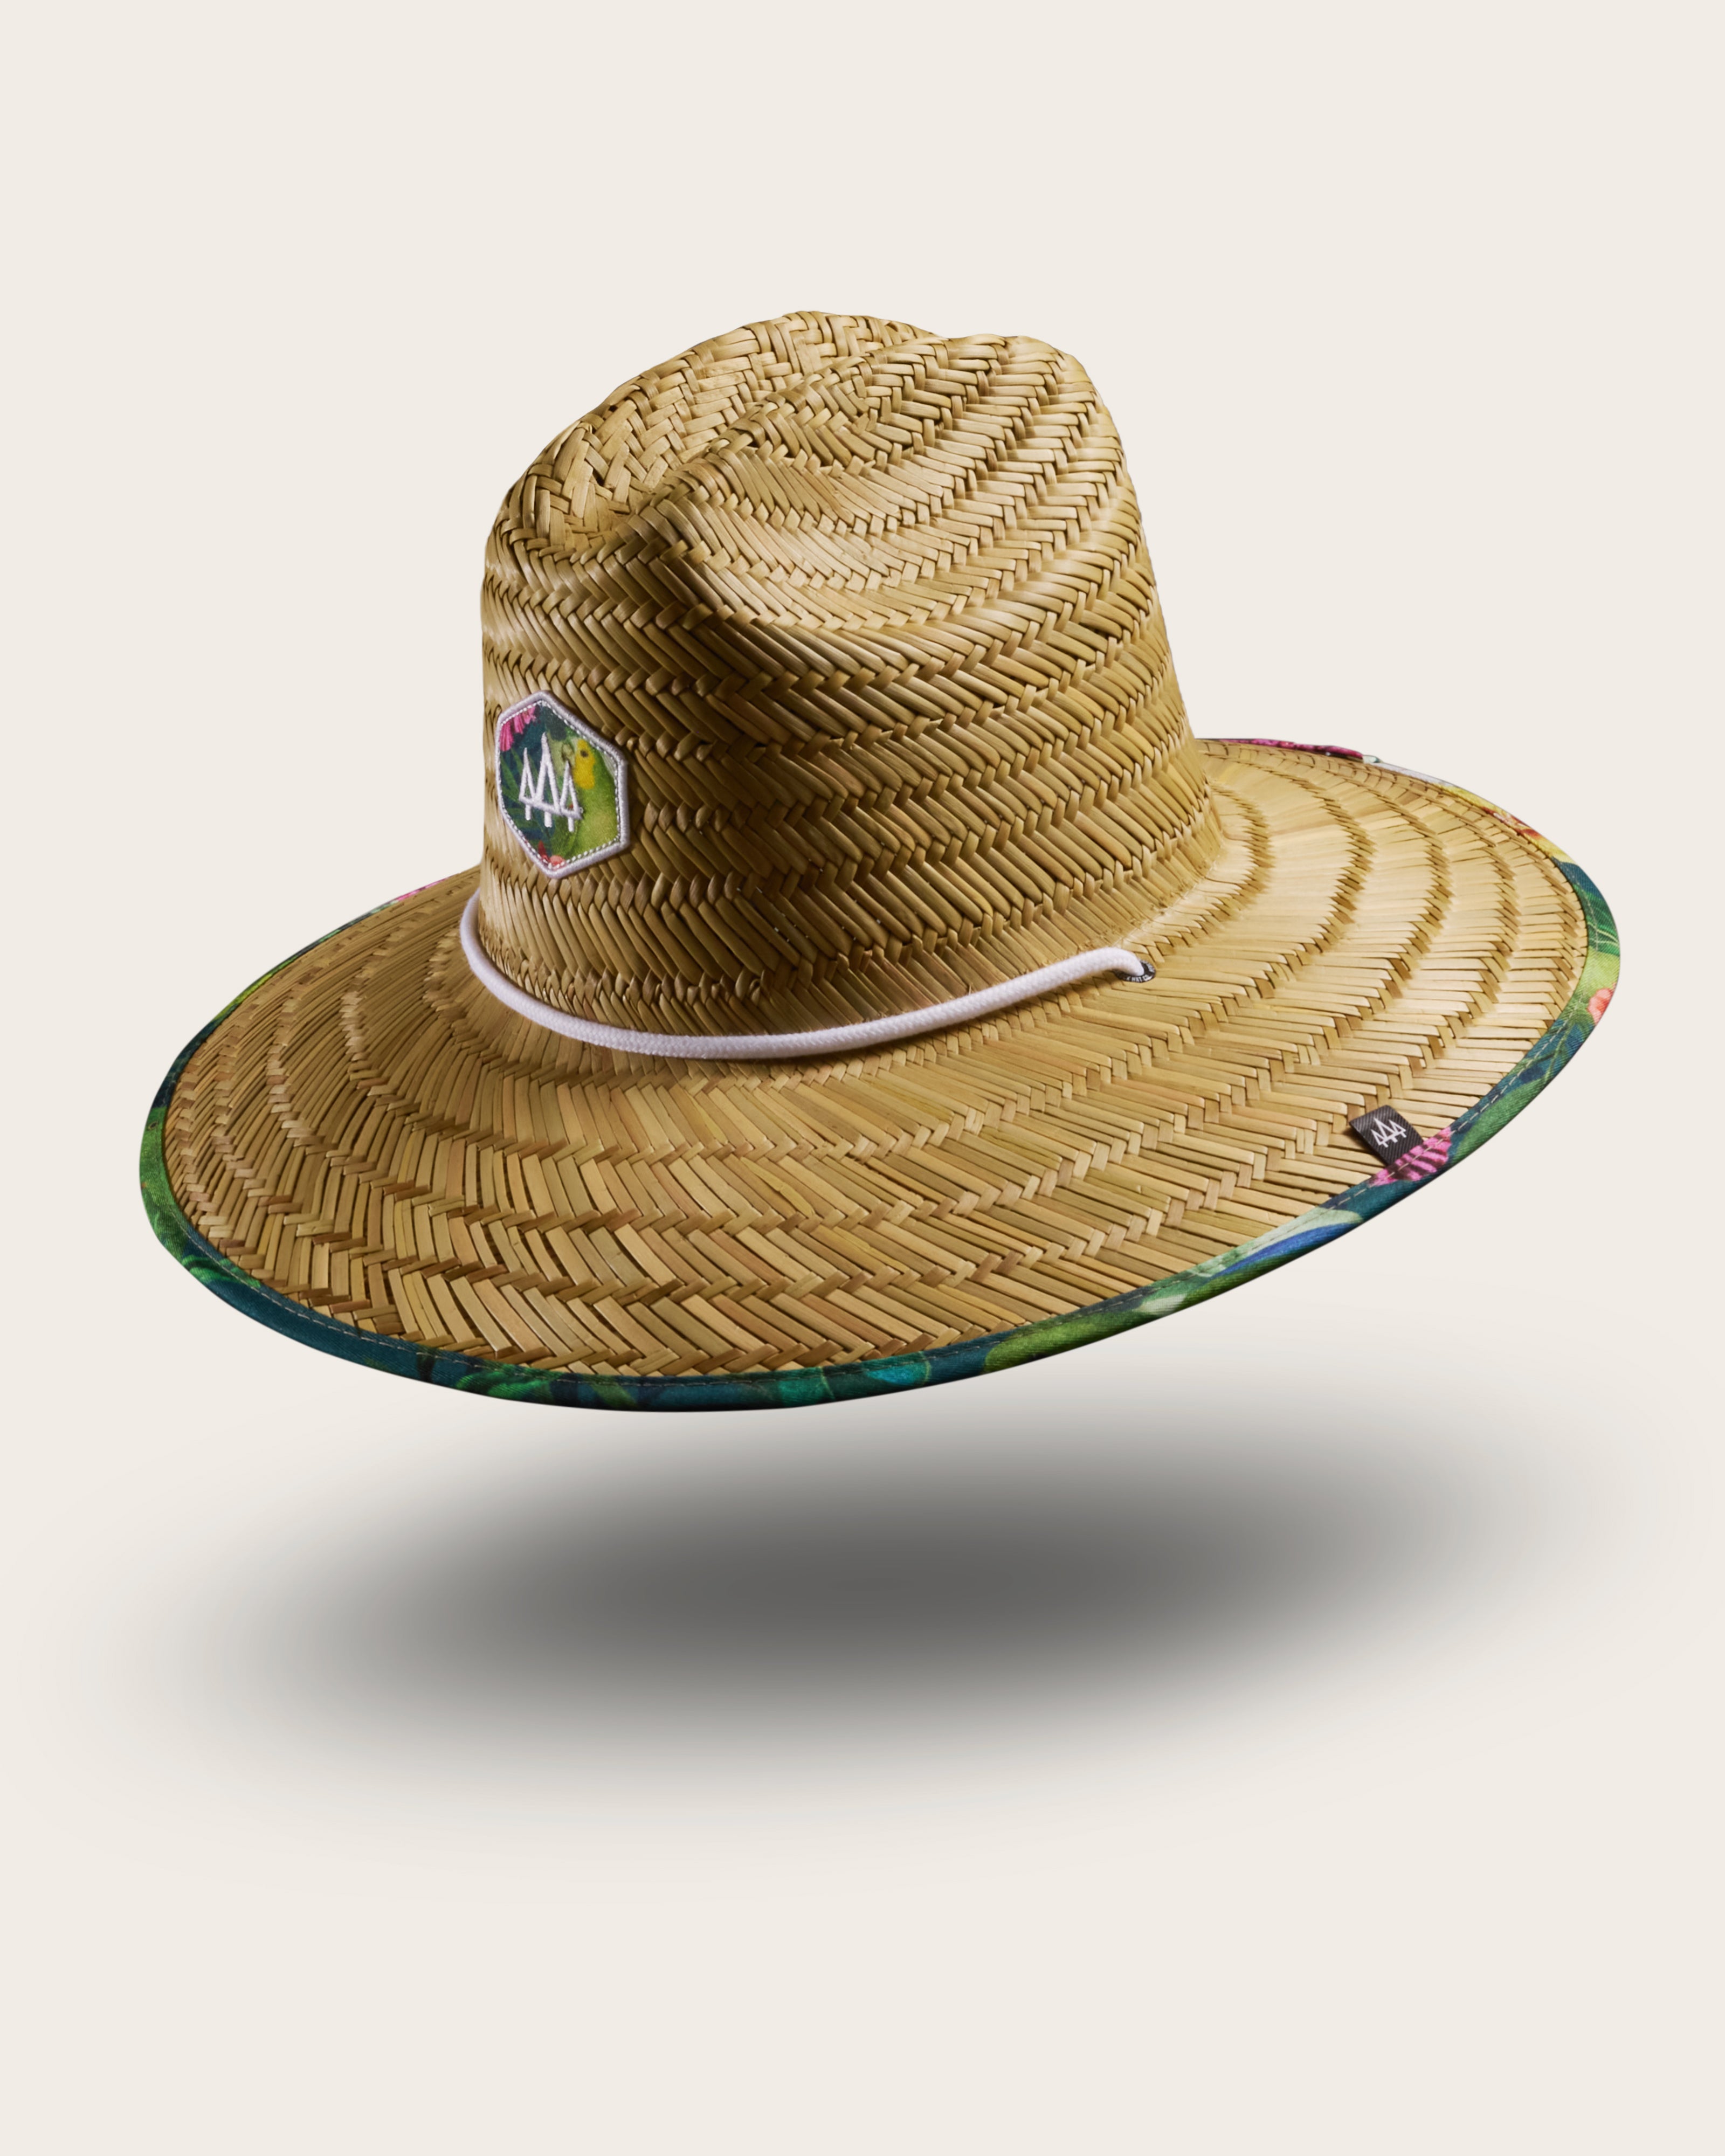 Hemlock Caicos straw lifeguard hat with Green Parrot pattern with patch